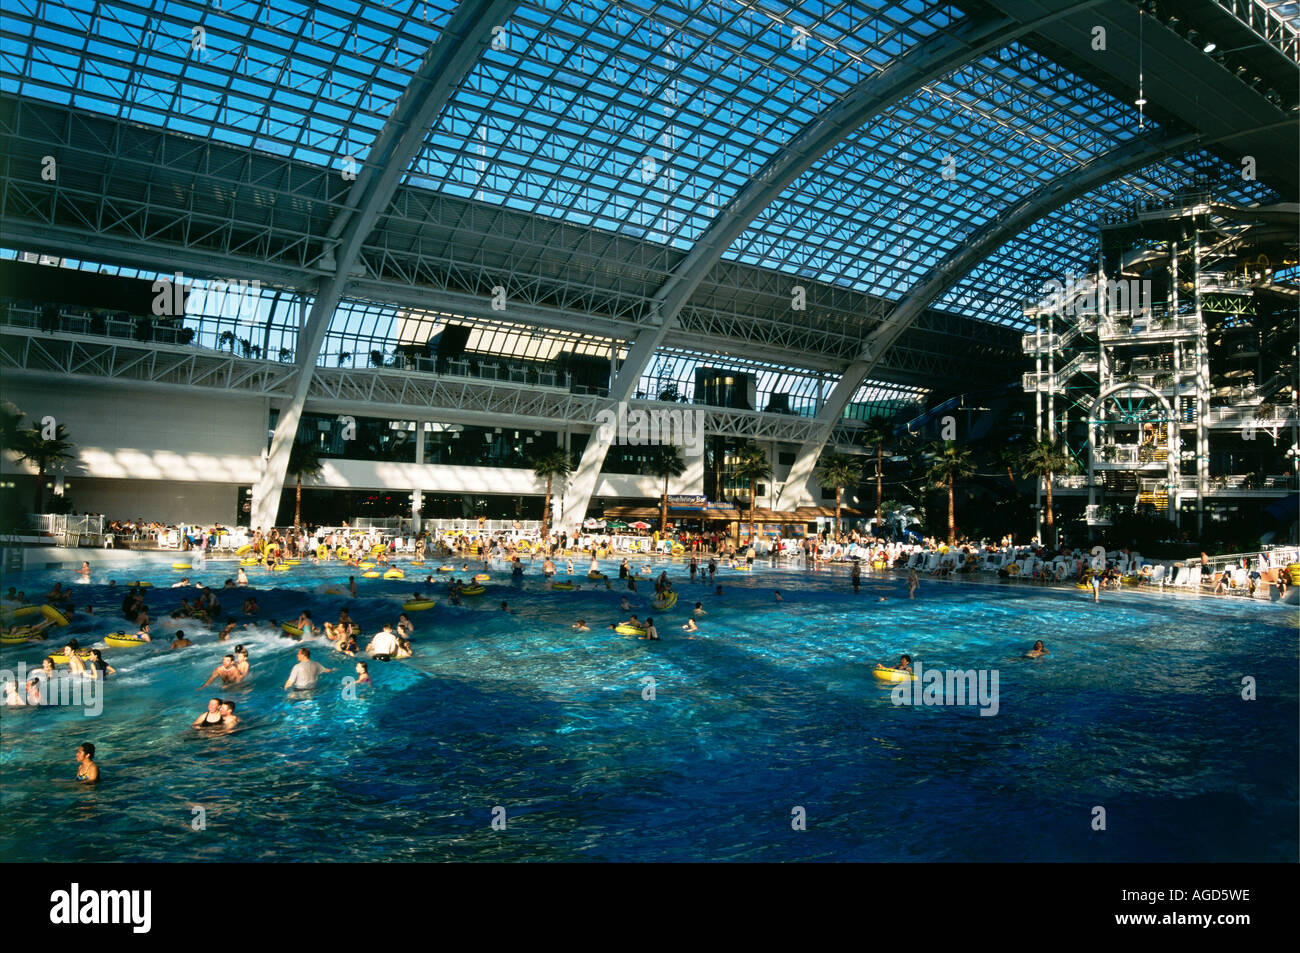 West Edmonton Mall People Canada High Resolution Stock Photography And Images Alamy